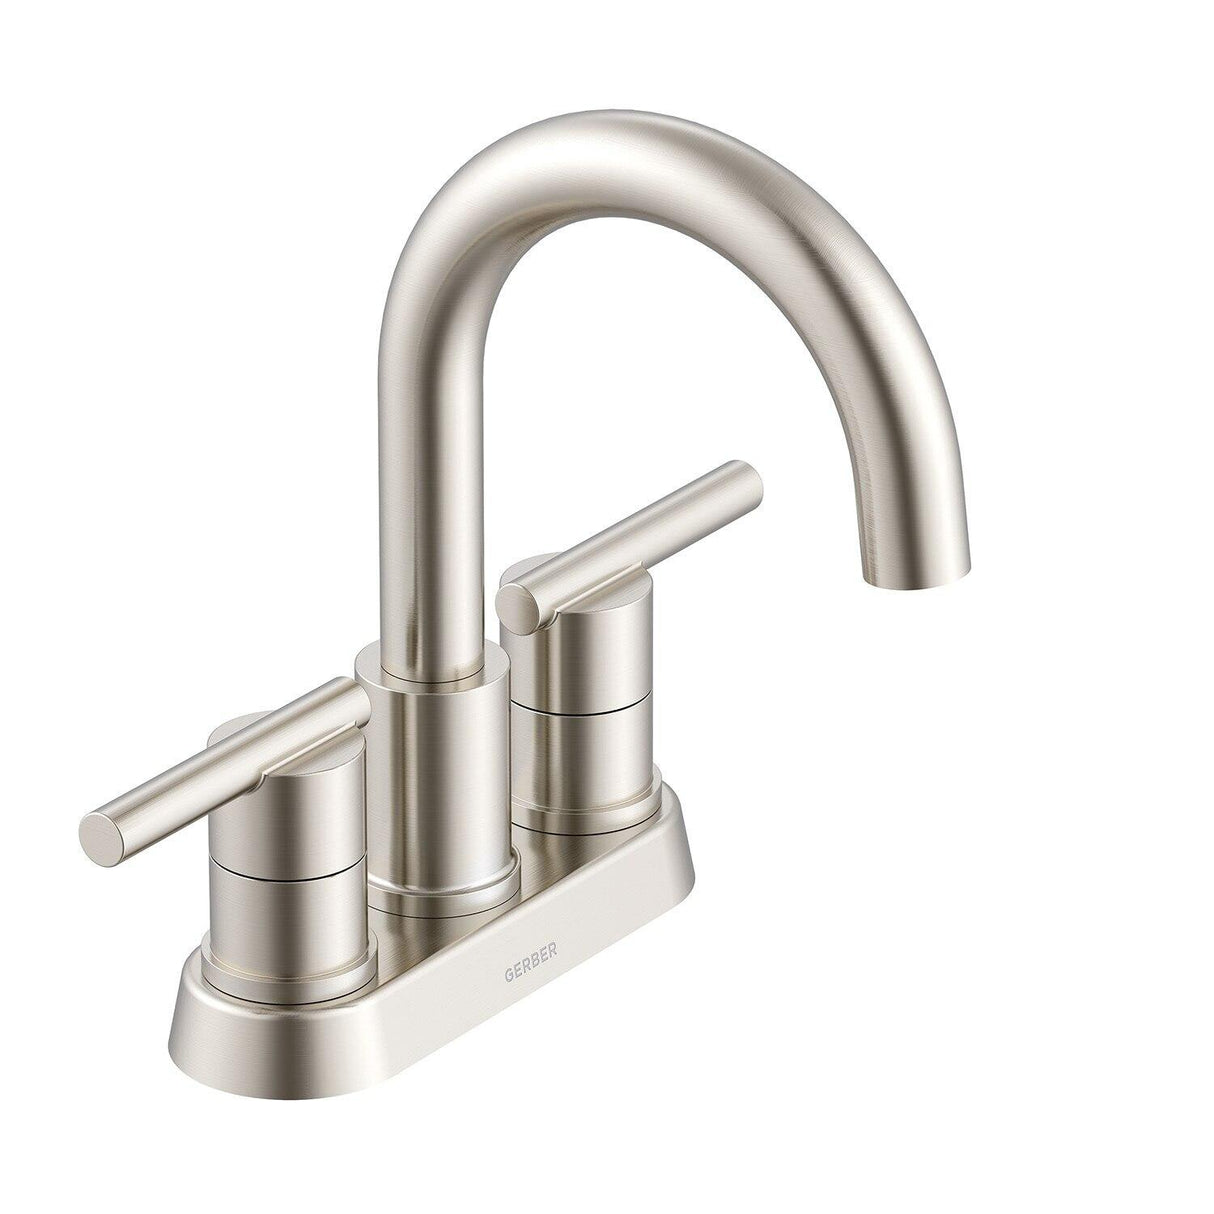 Gerber D307058BS Parma Two Handle Centerset Bathroom Faucet With Metal Touch DOWN...